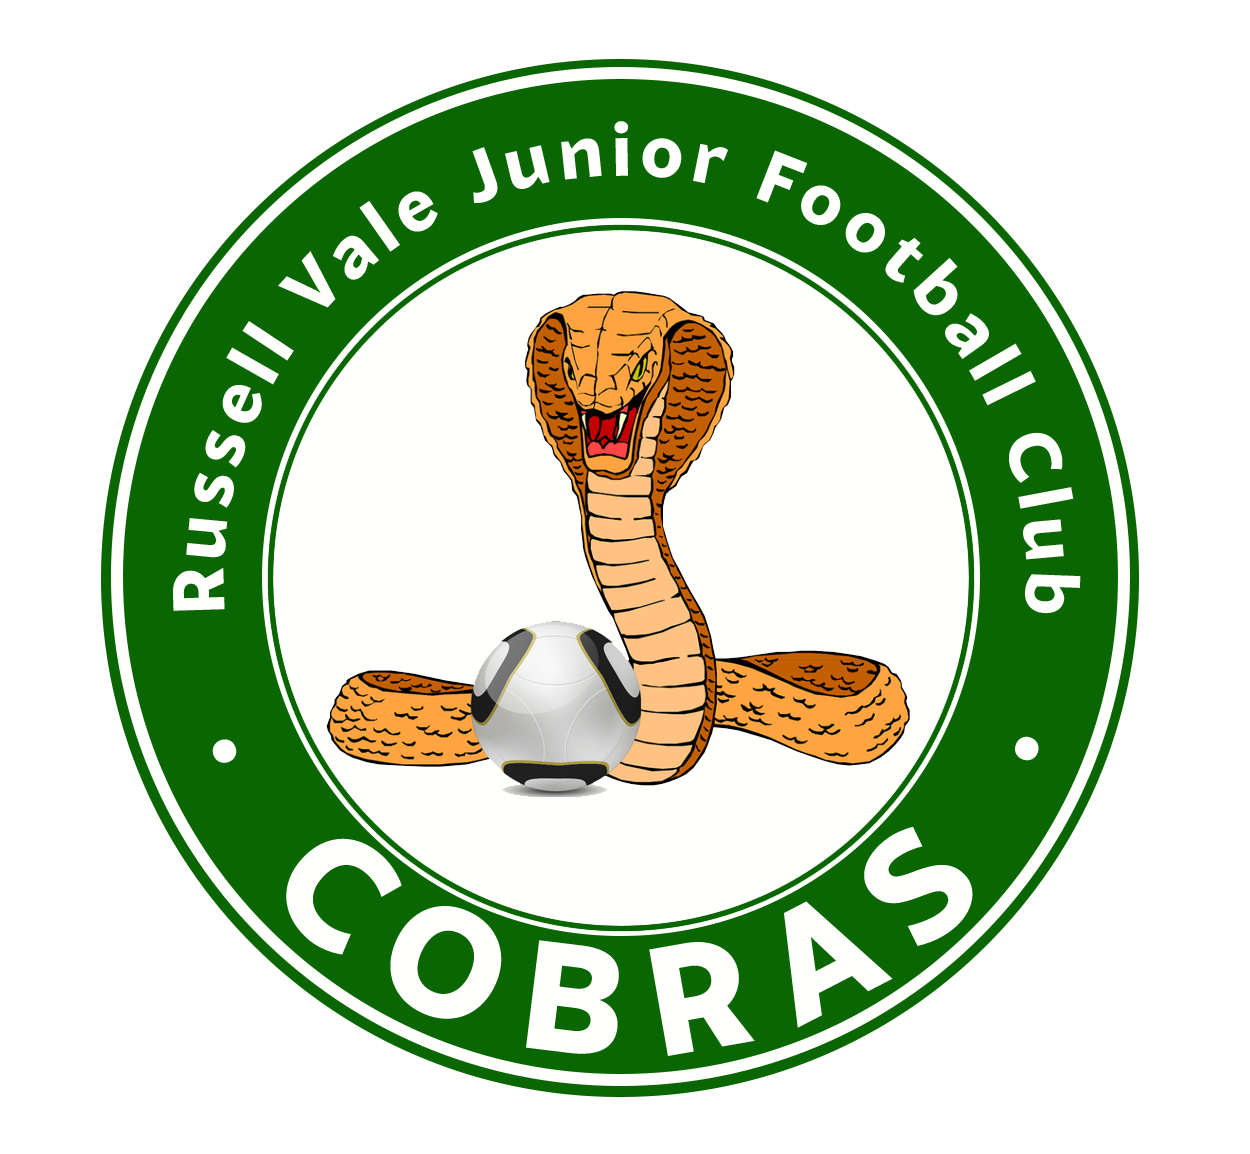 Russell Vale Junior Soccer Club